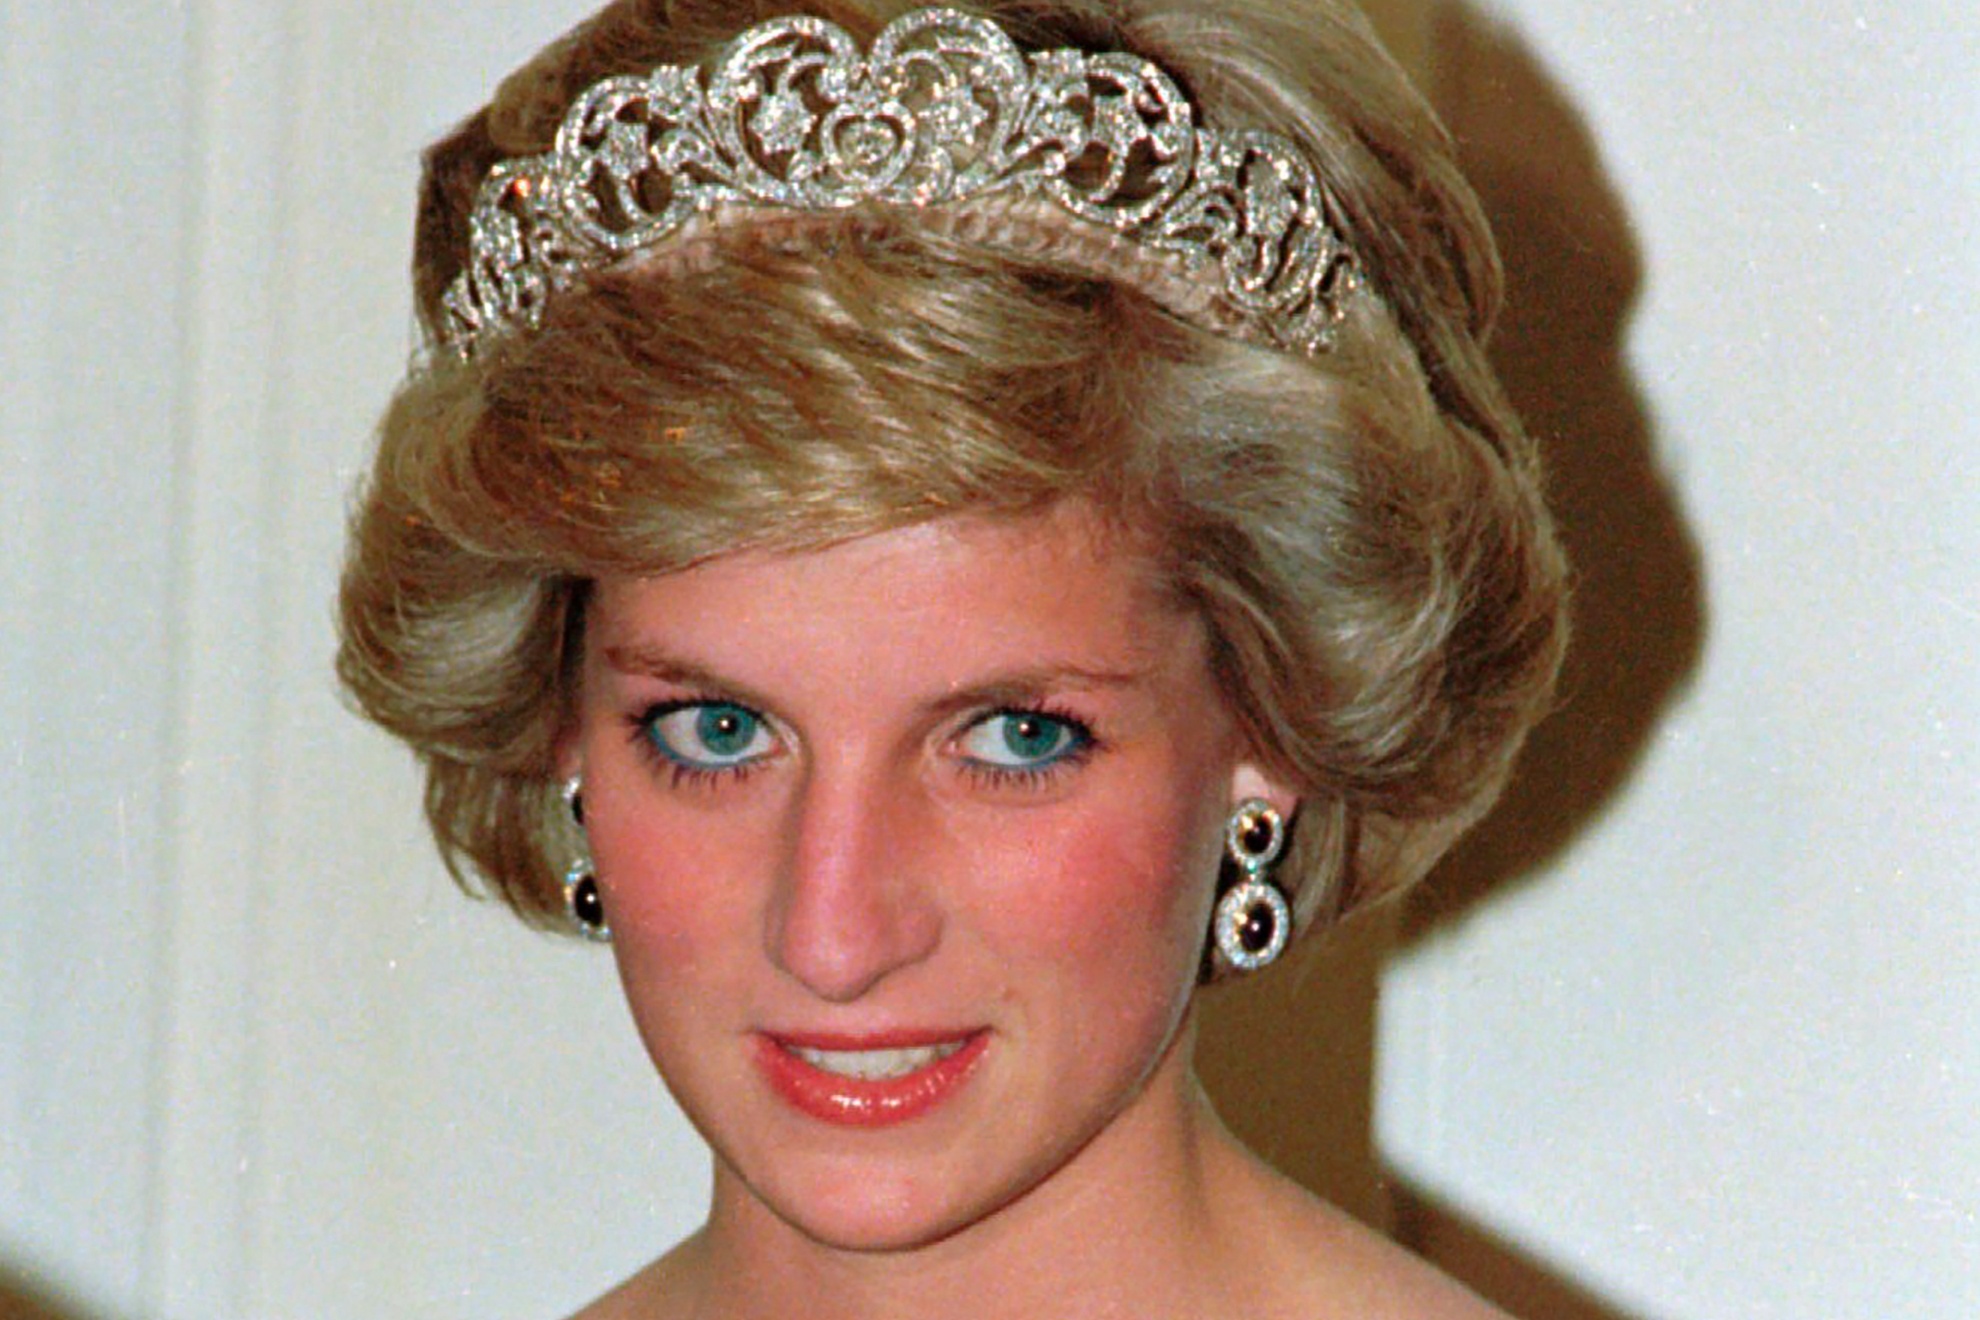 The late Princess of Wales, Diana Spencer.